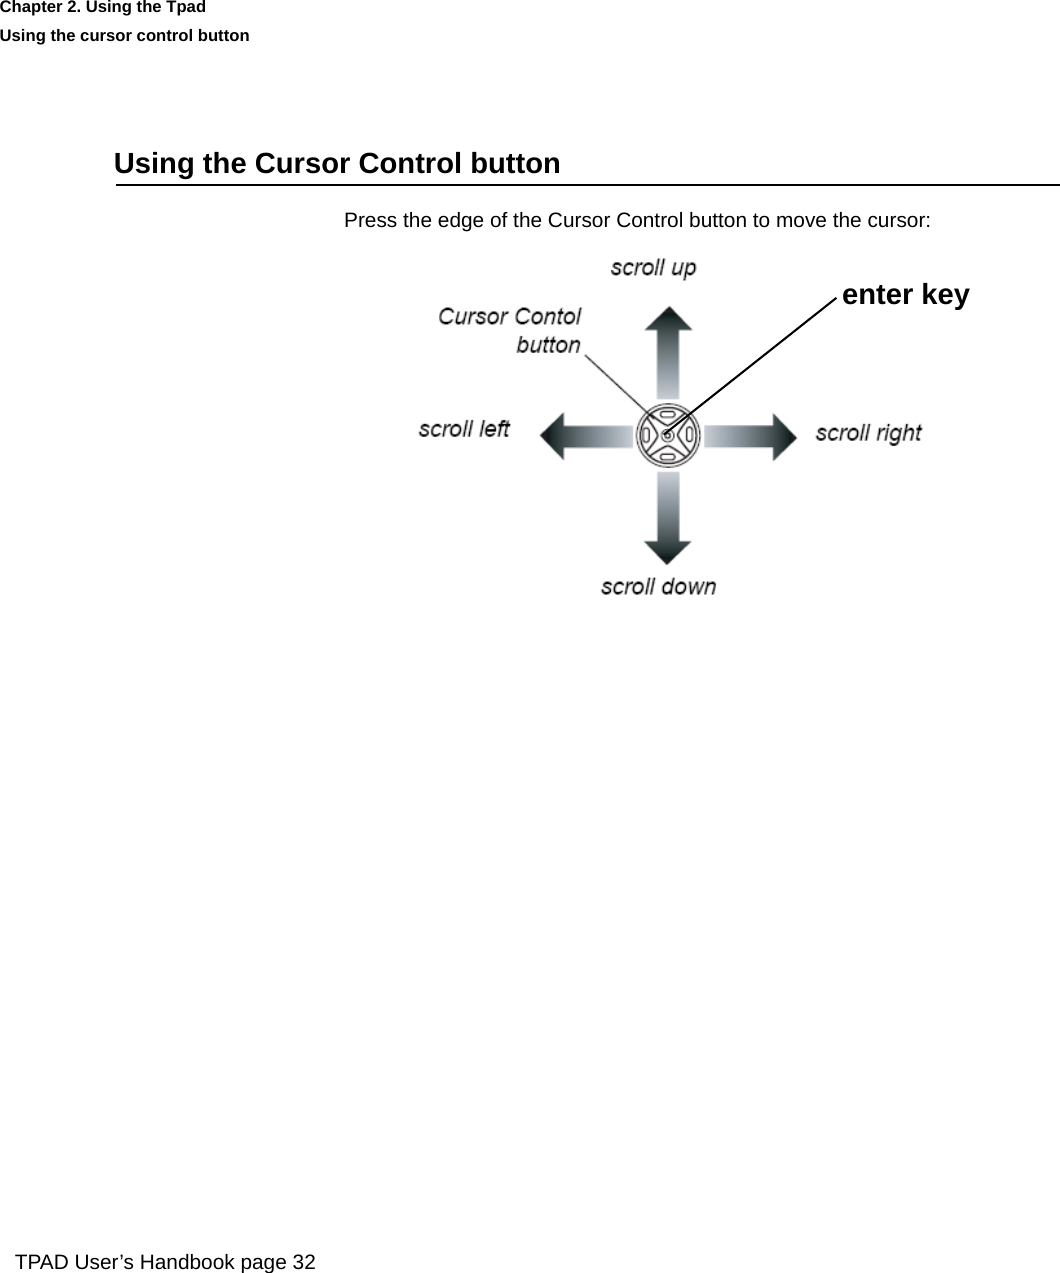 Using the Cursor Control buttonPress the edge of the Cursor Control button to move the cursor:enter keyTPAD User’s Handbook page 32Chapter 2. Using the TpadUsing the cursor control button       